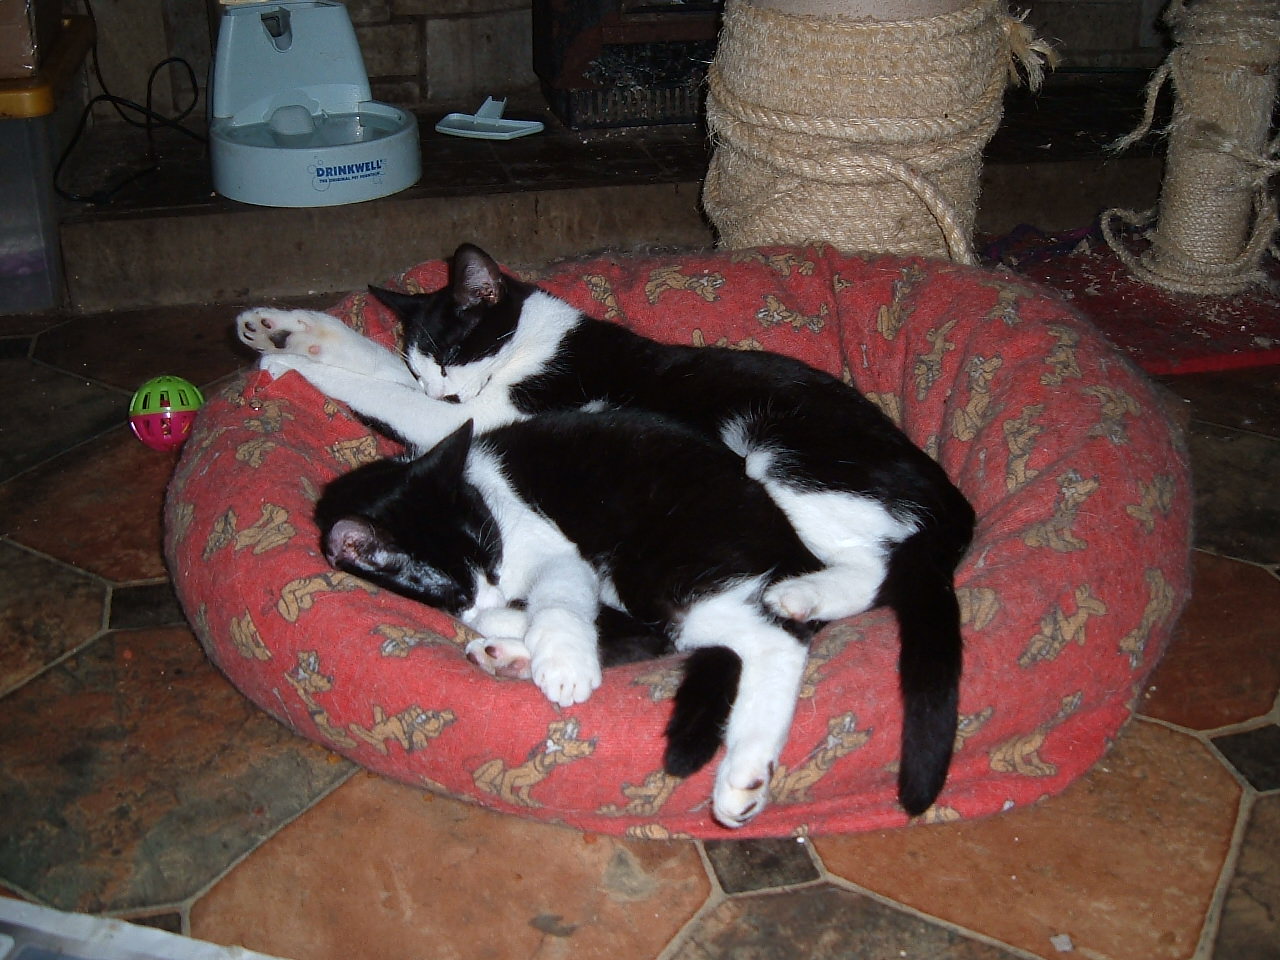 Bill and Ben sleeping on a bean bag together